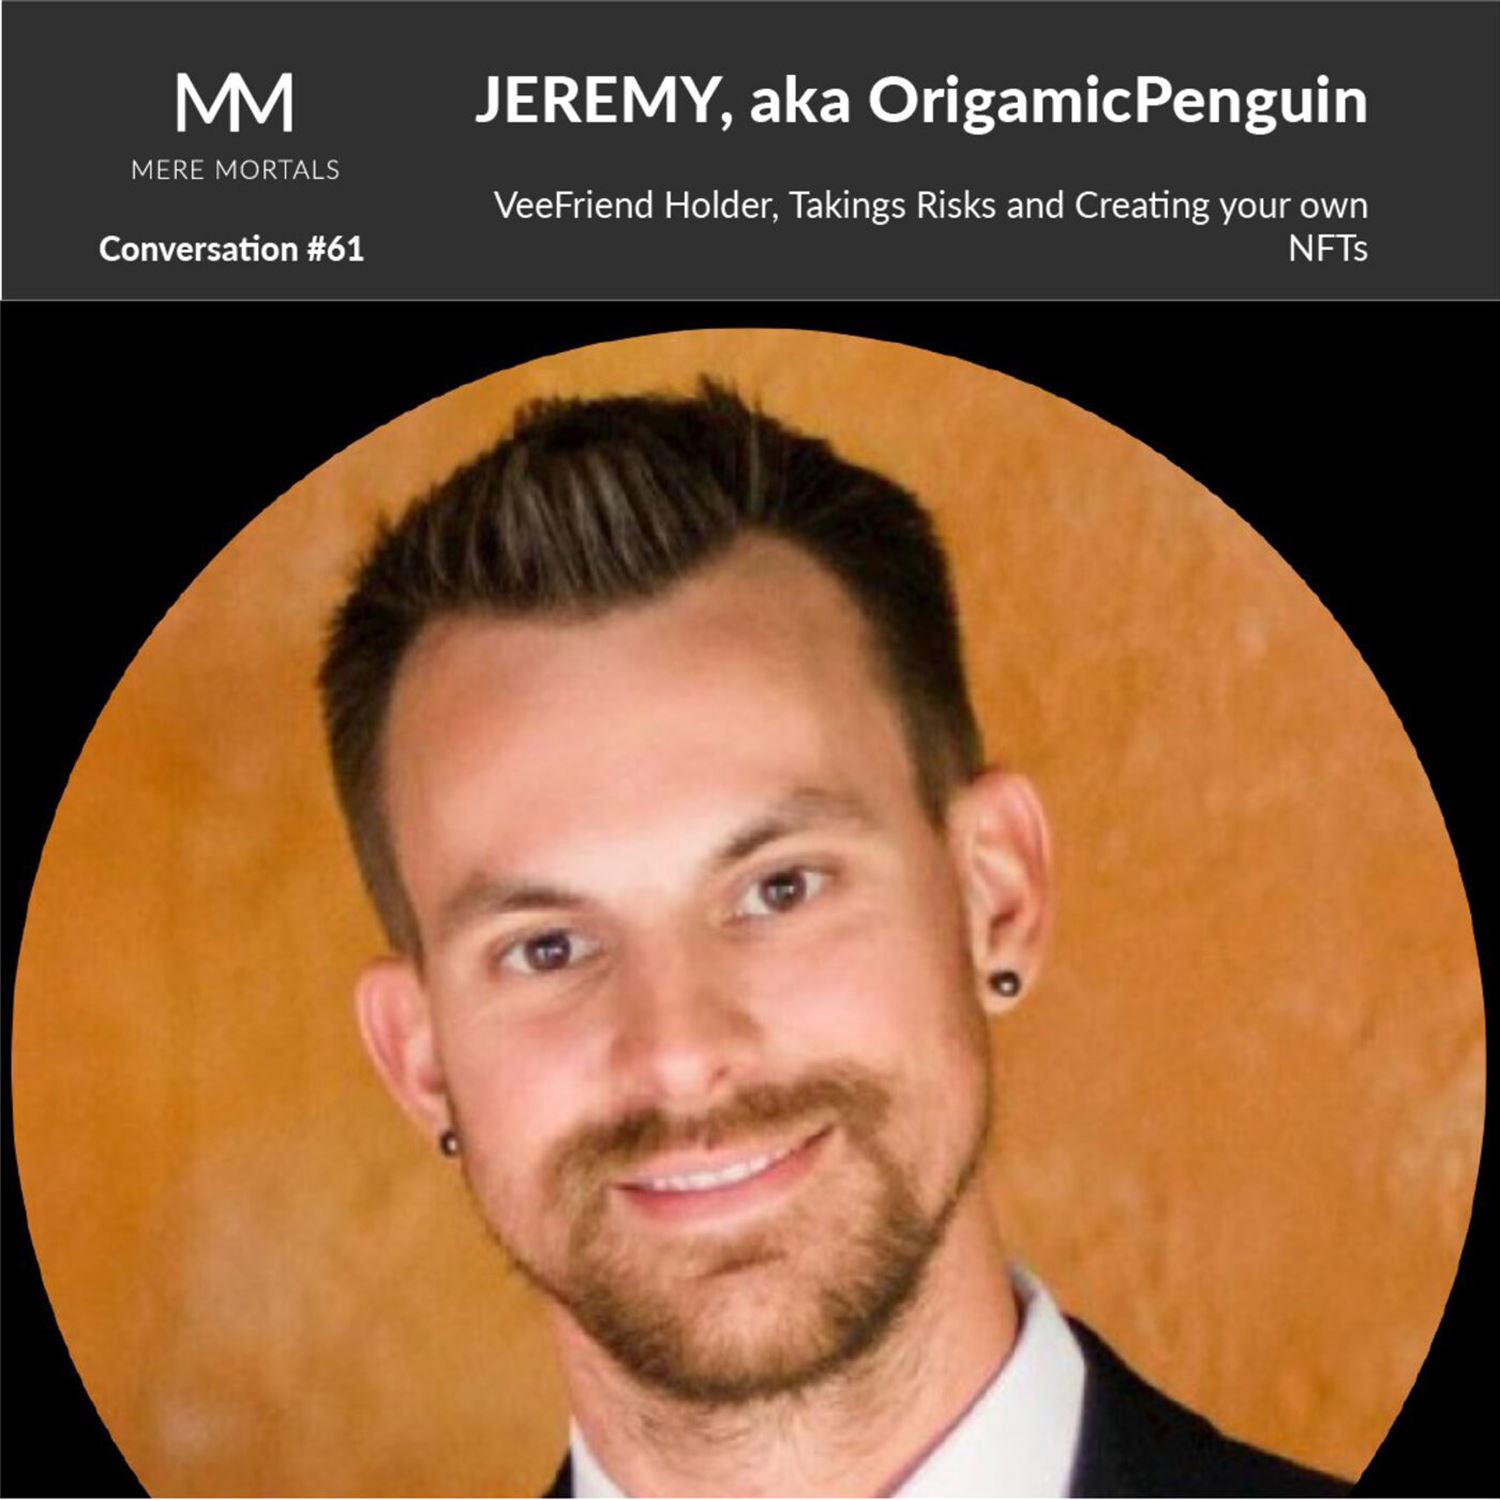 JEREMY aka OrigamicPenguin | VeeFriend holder, taking risks and creating your own NFTs